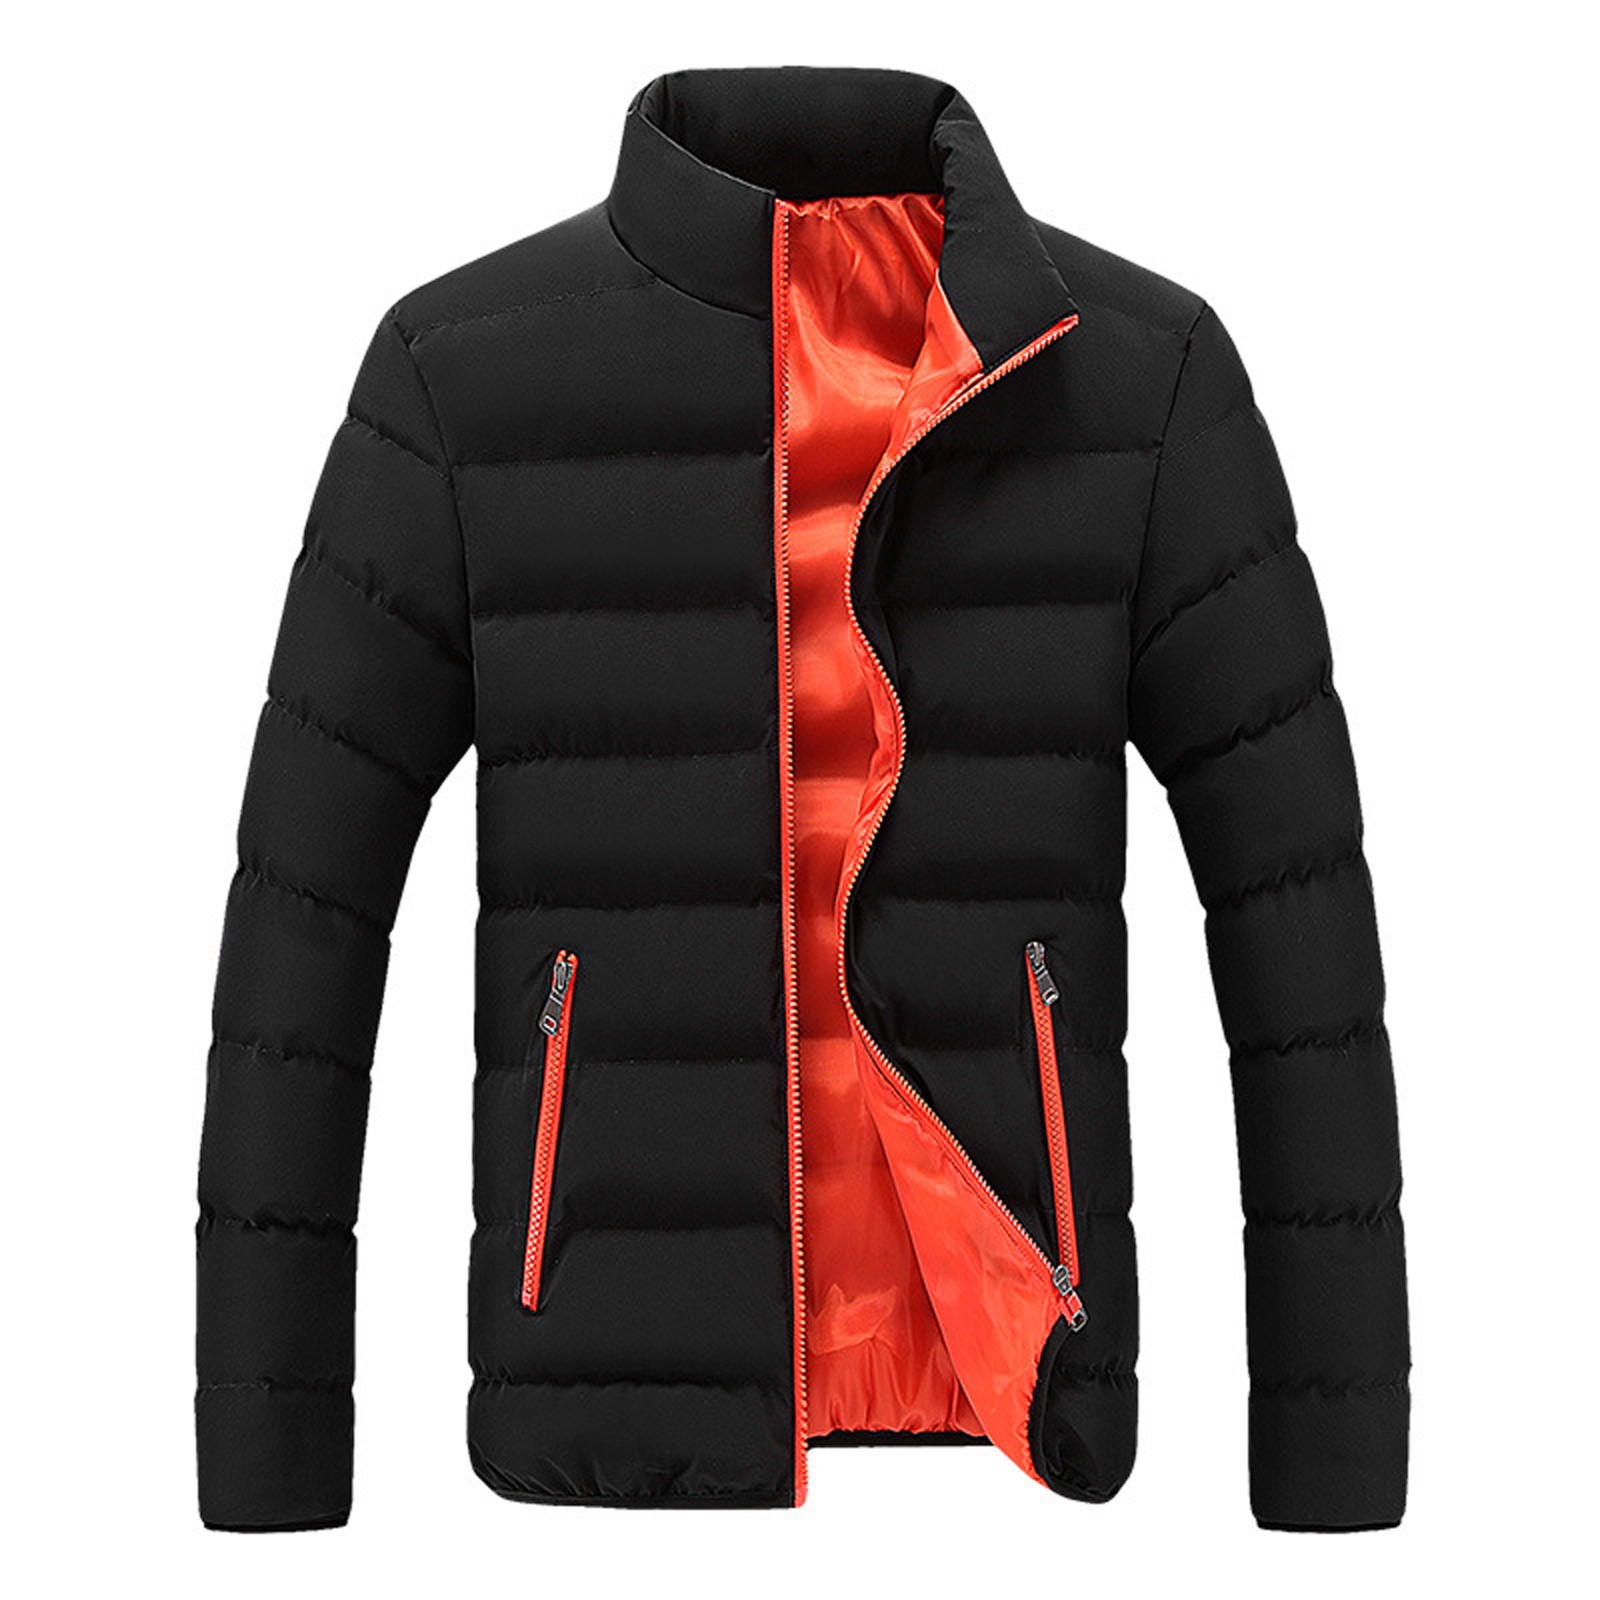 2020 New Men Jacket Winter Jacket Men Warm Solid Color Slim Fit Thick Bubble Coat Casual Stand-Collar Cotton Jacket Outerwear